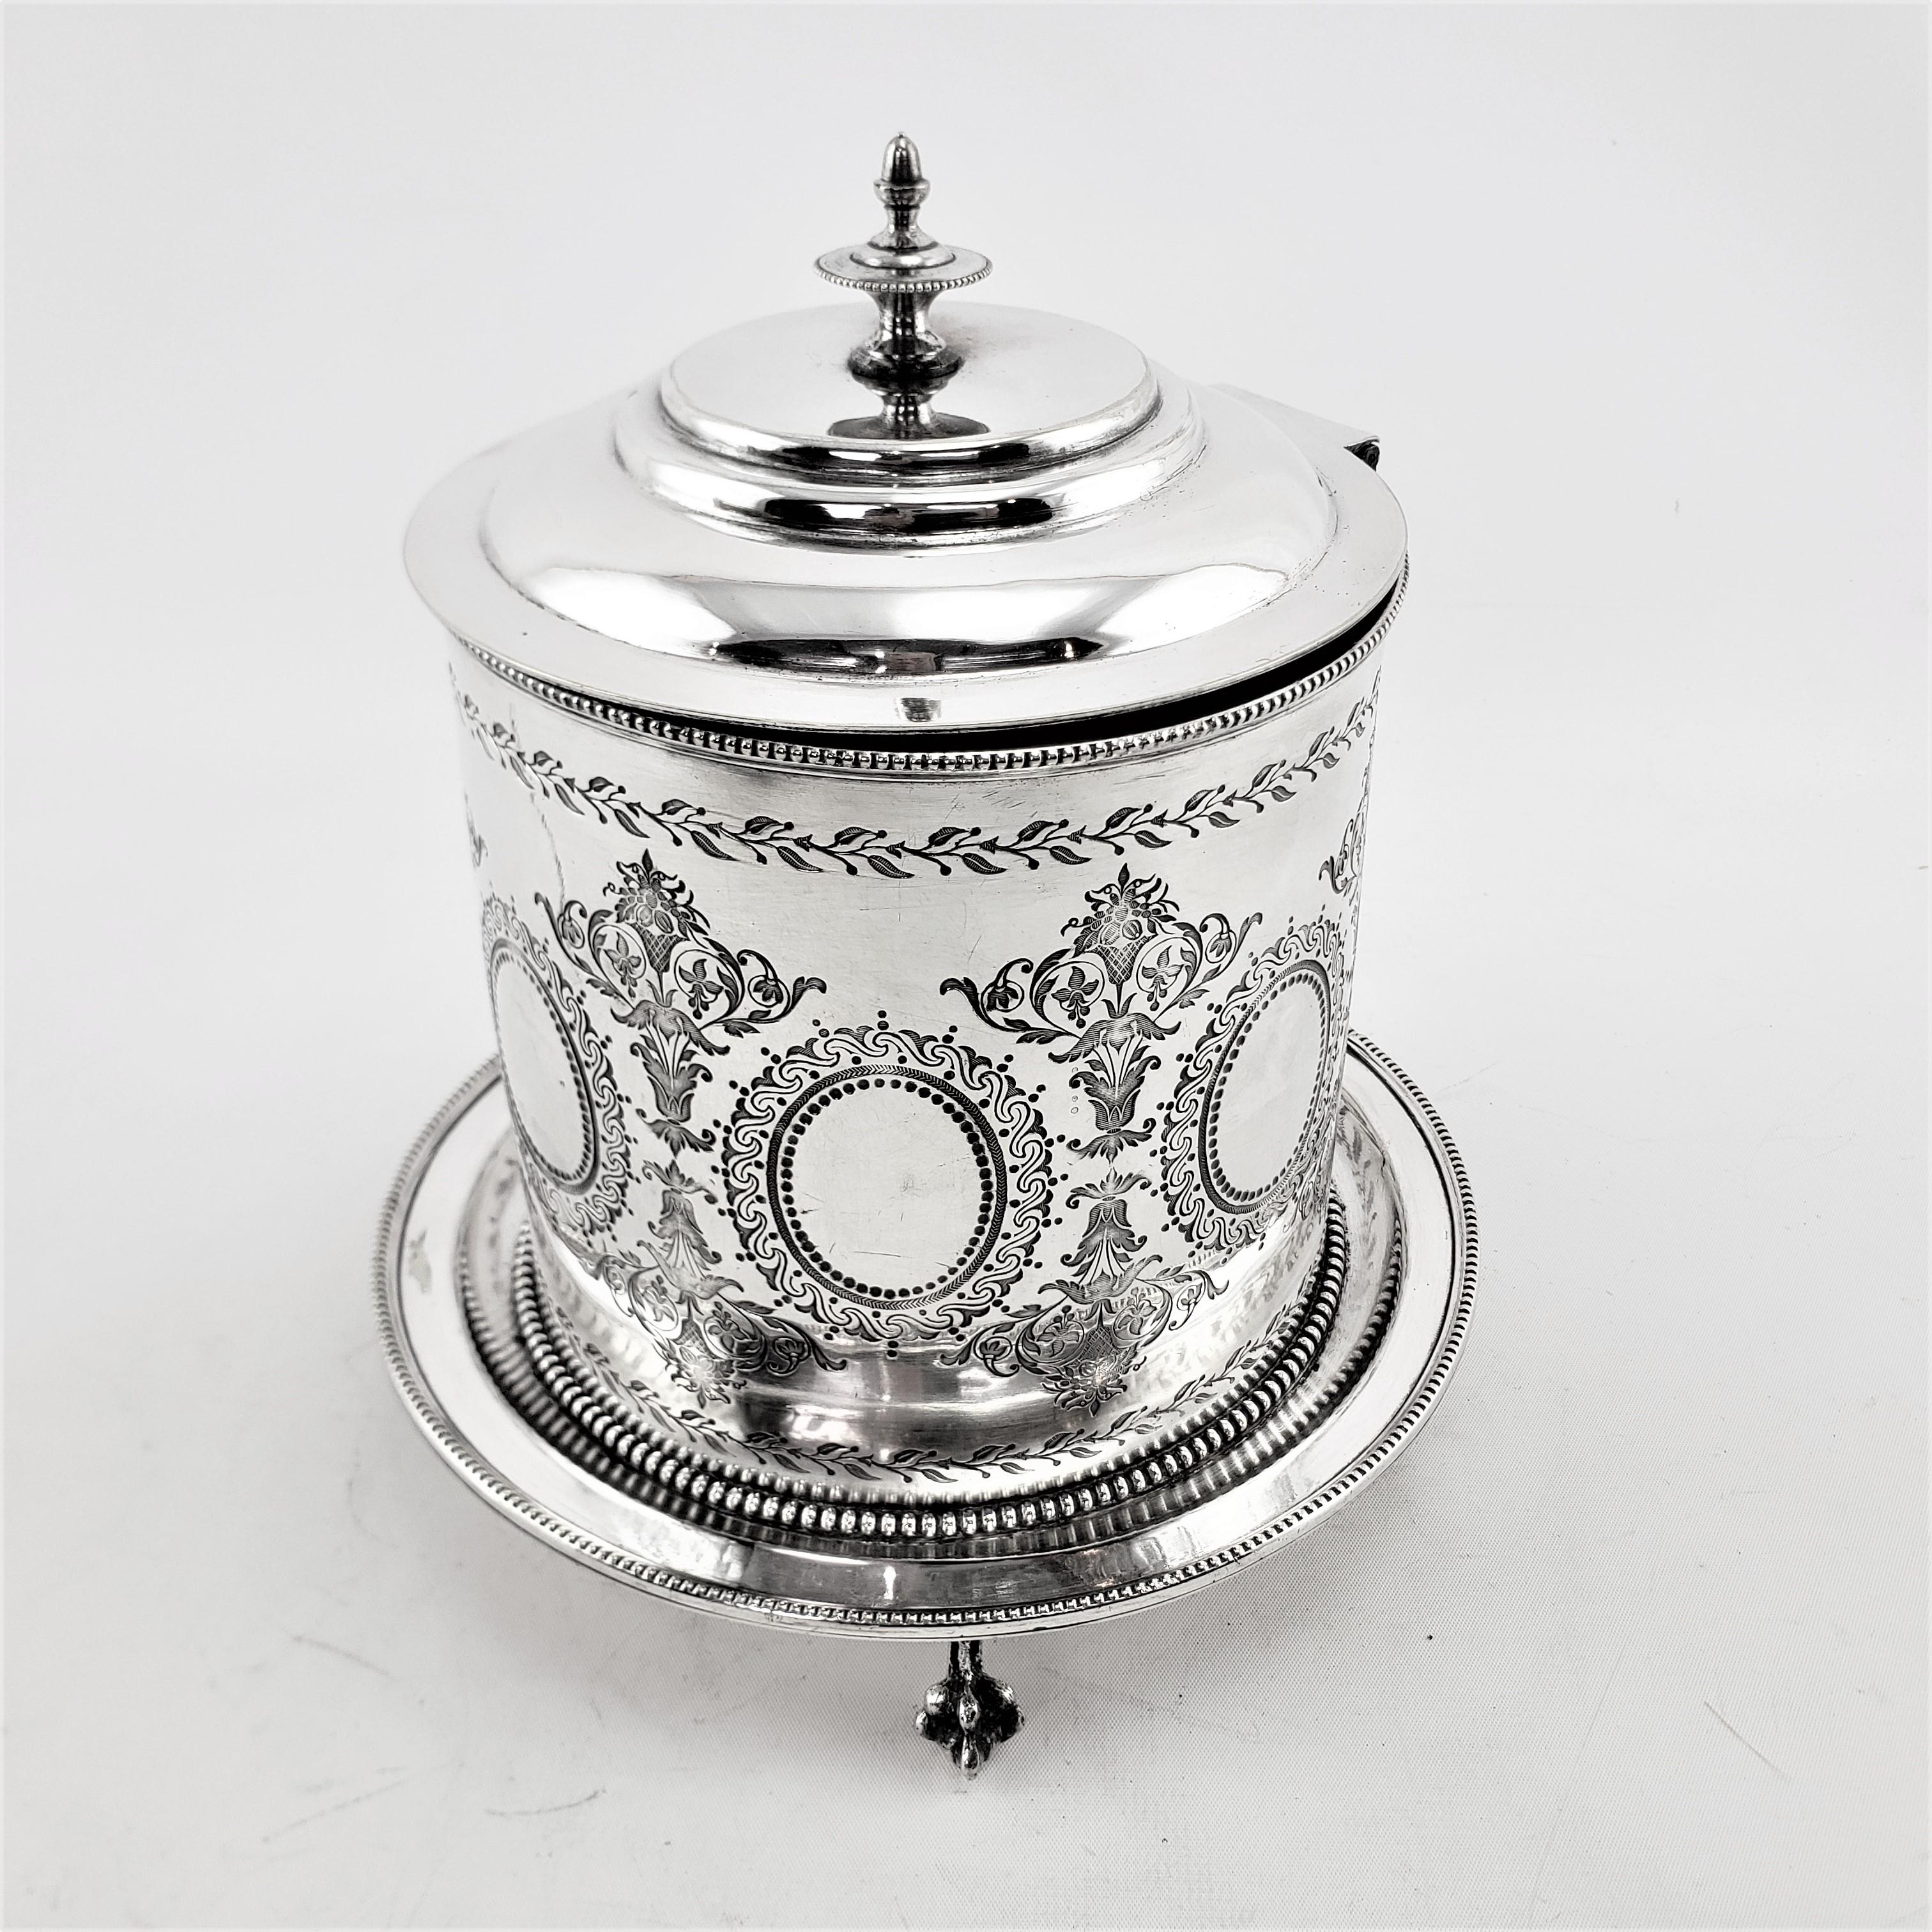 Engraved Antique English Silver Plated Oval Biscuit Barrel with Elaborate Engraving For Sale